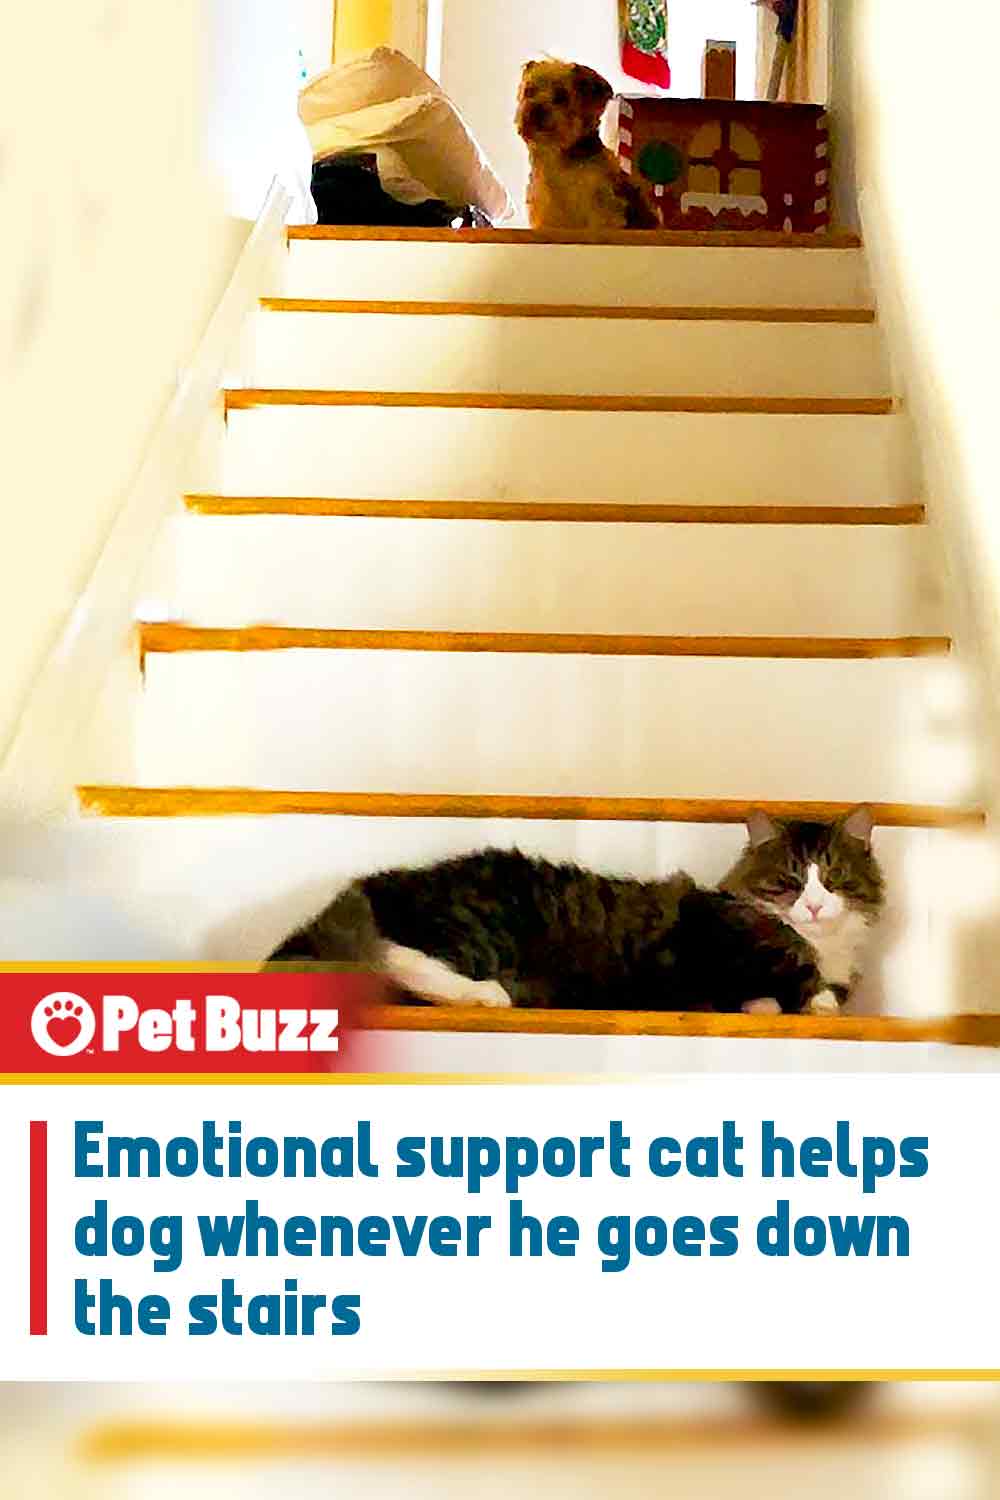 Emotional support cat helps dog whenever he goes down the stairs